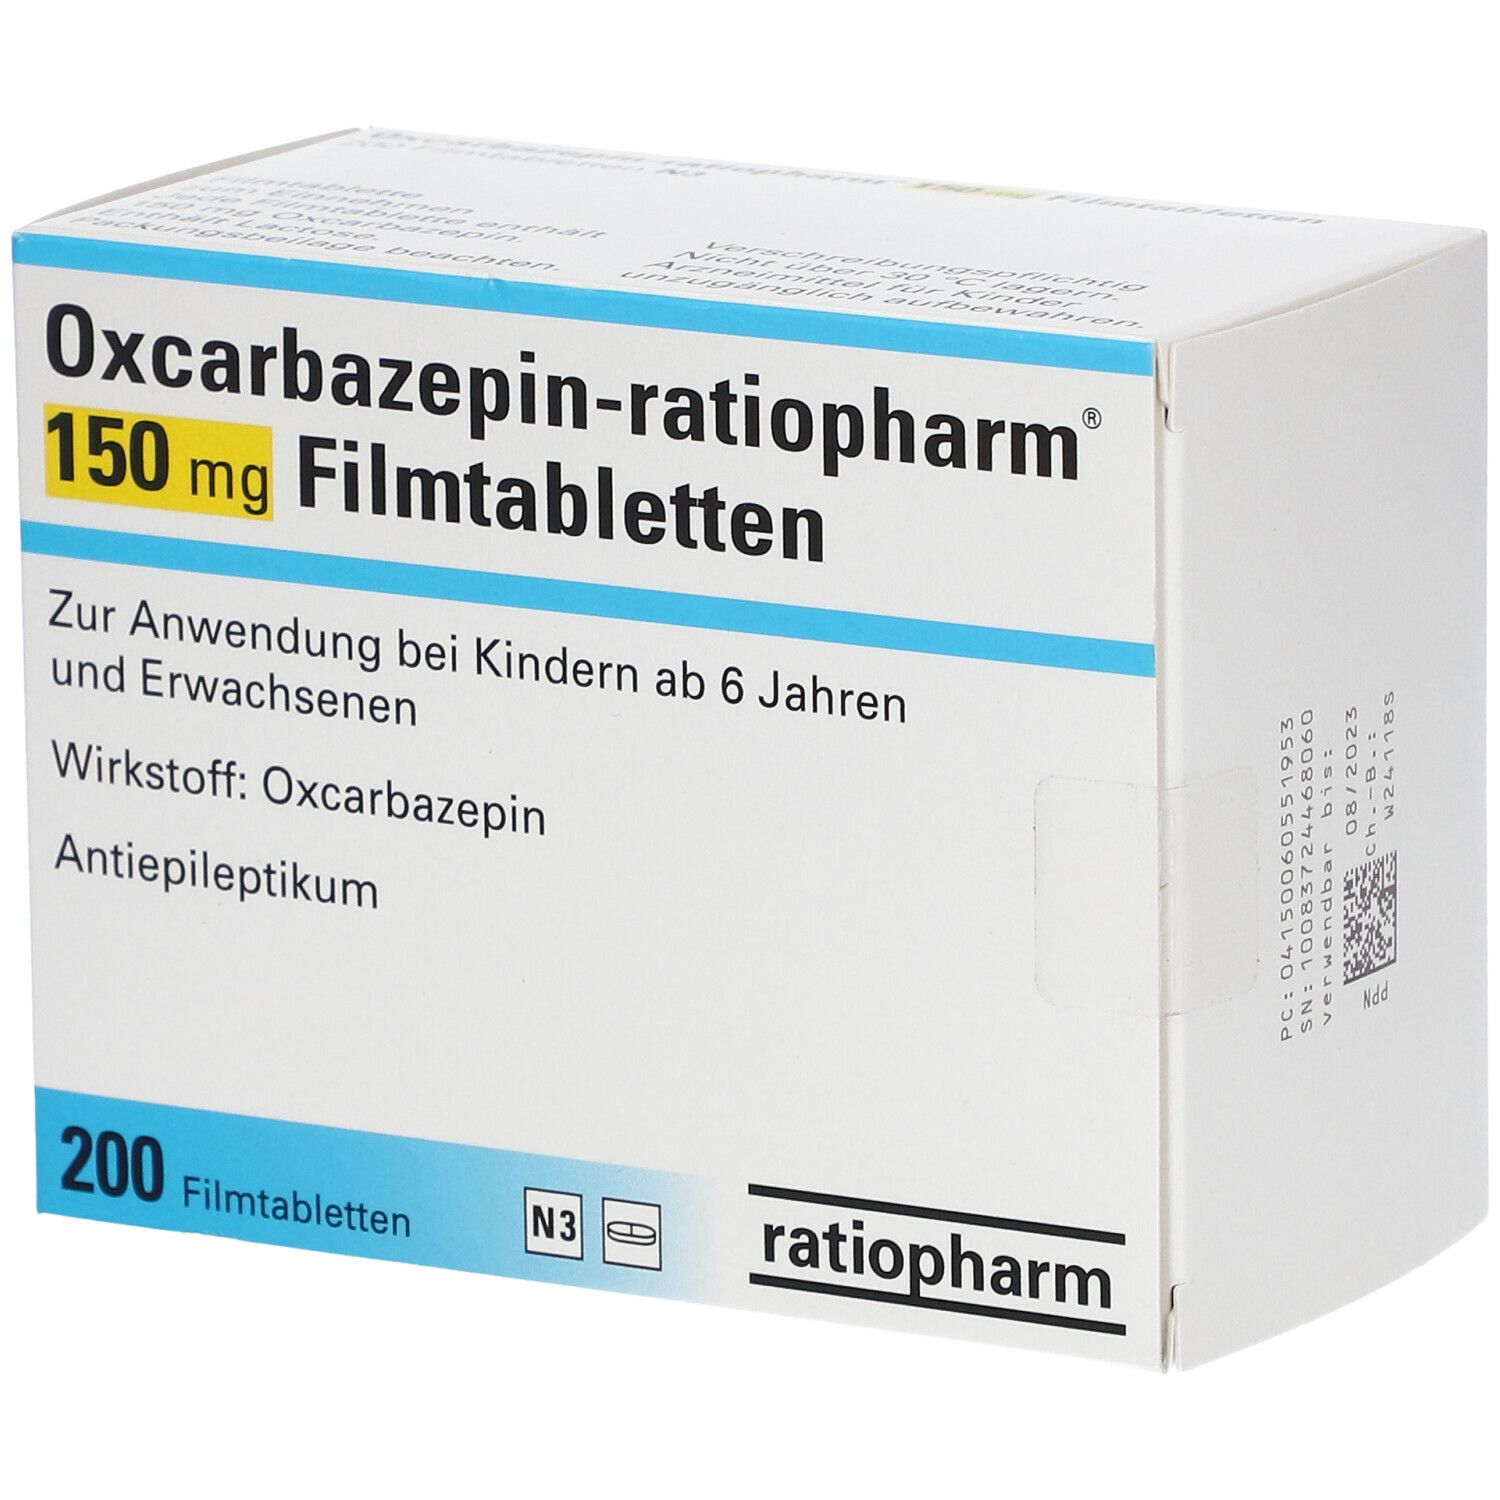 Oxcarbazepin-ratiopharm® 150 mg